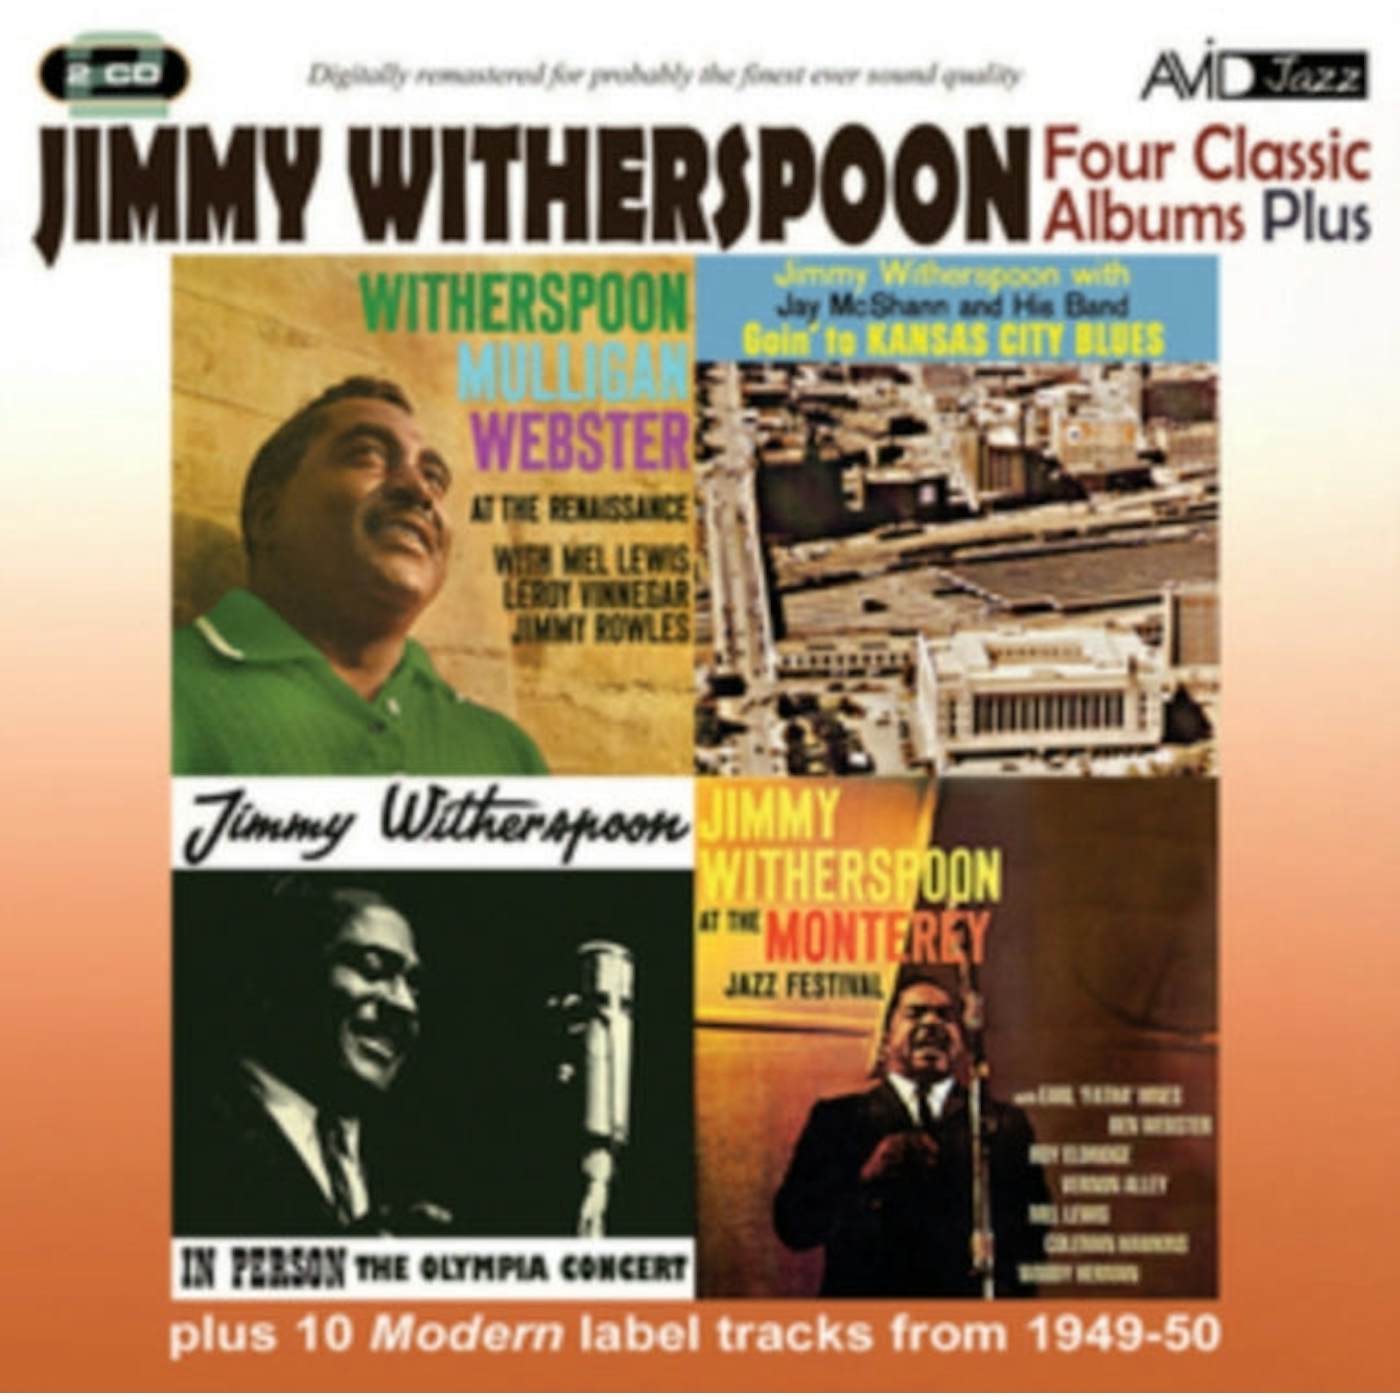 Jimmy Witherspoon CD - Four Classic Albums Plus